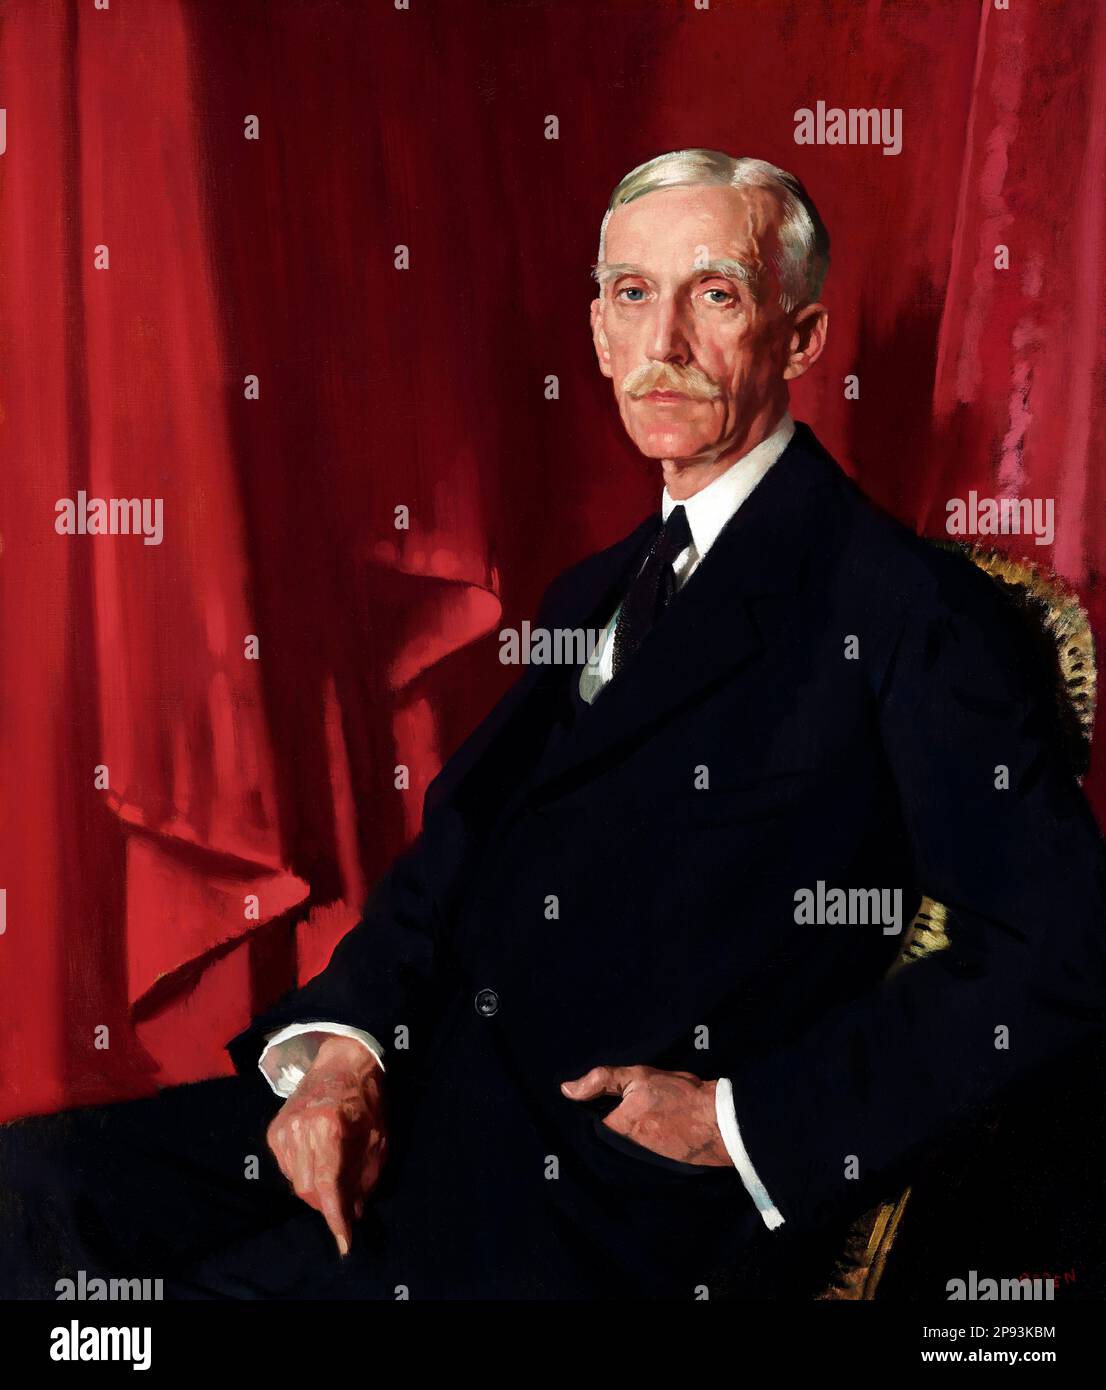 Andrew Mellon.  Portrait of the American banker and politician, Andrew William Mellon (1855-1937) by William Orpen, oil on canvas, 1924 Stock Photo